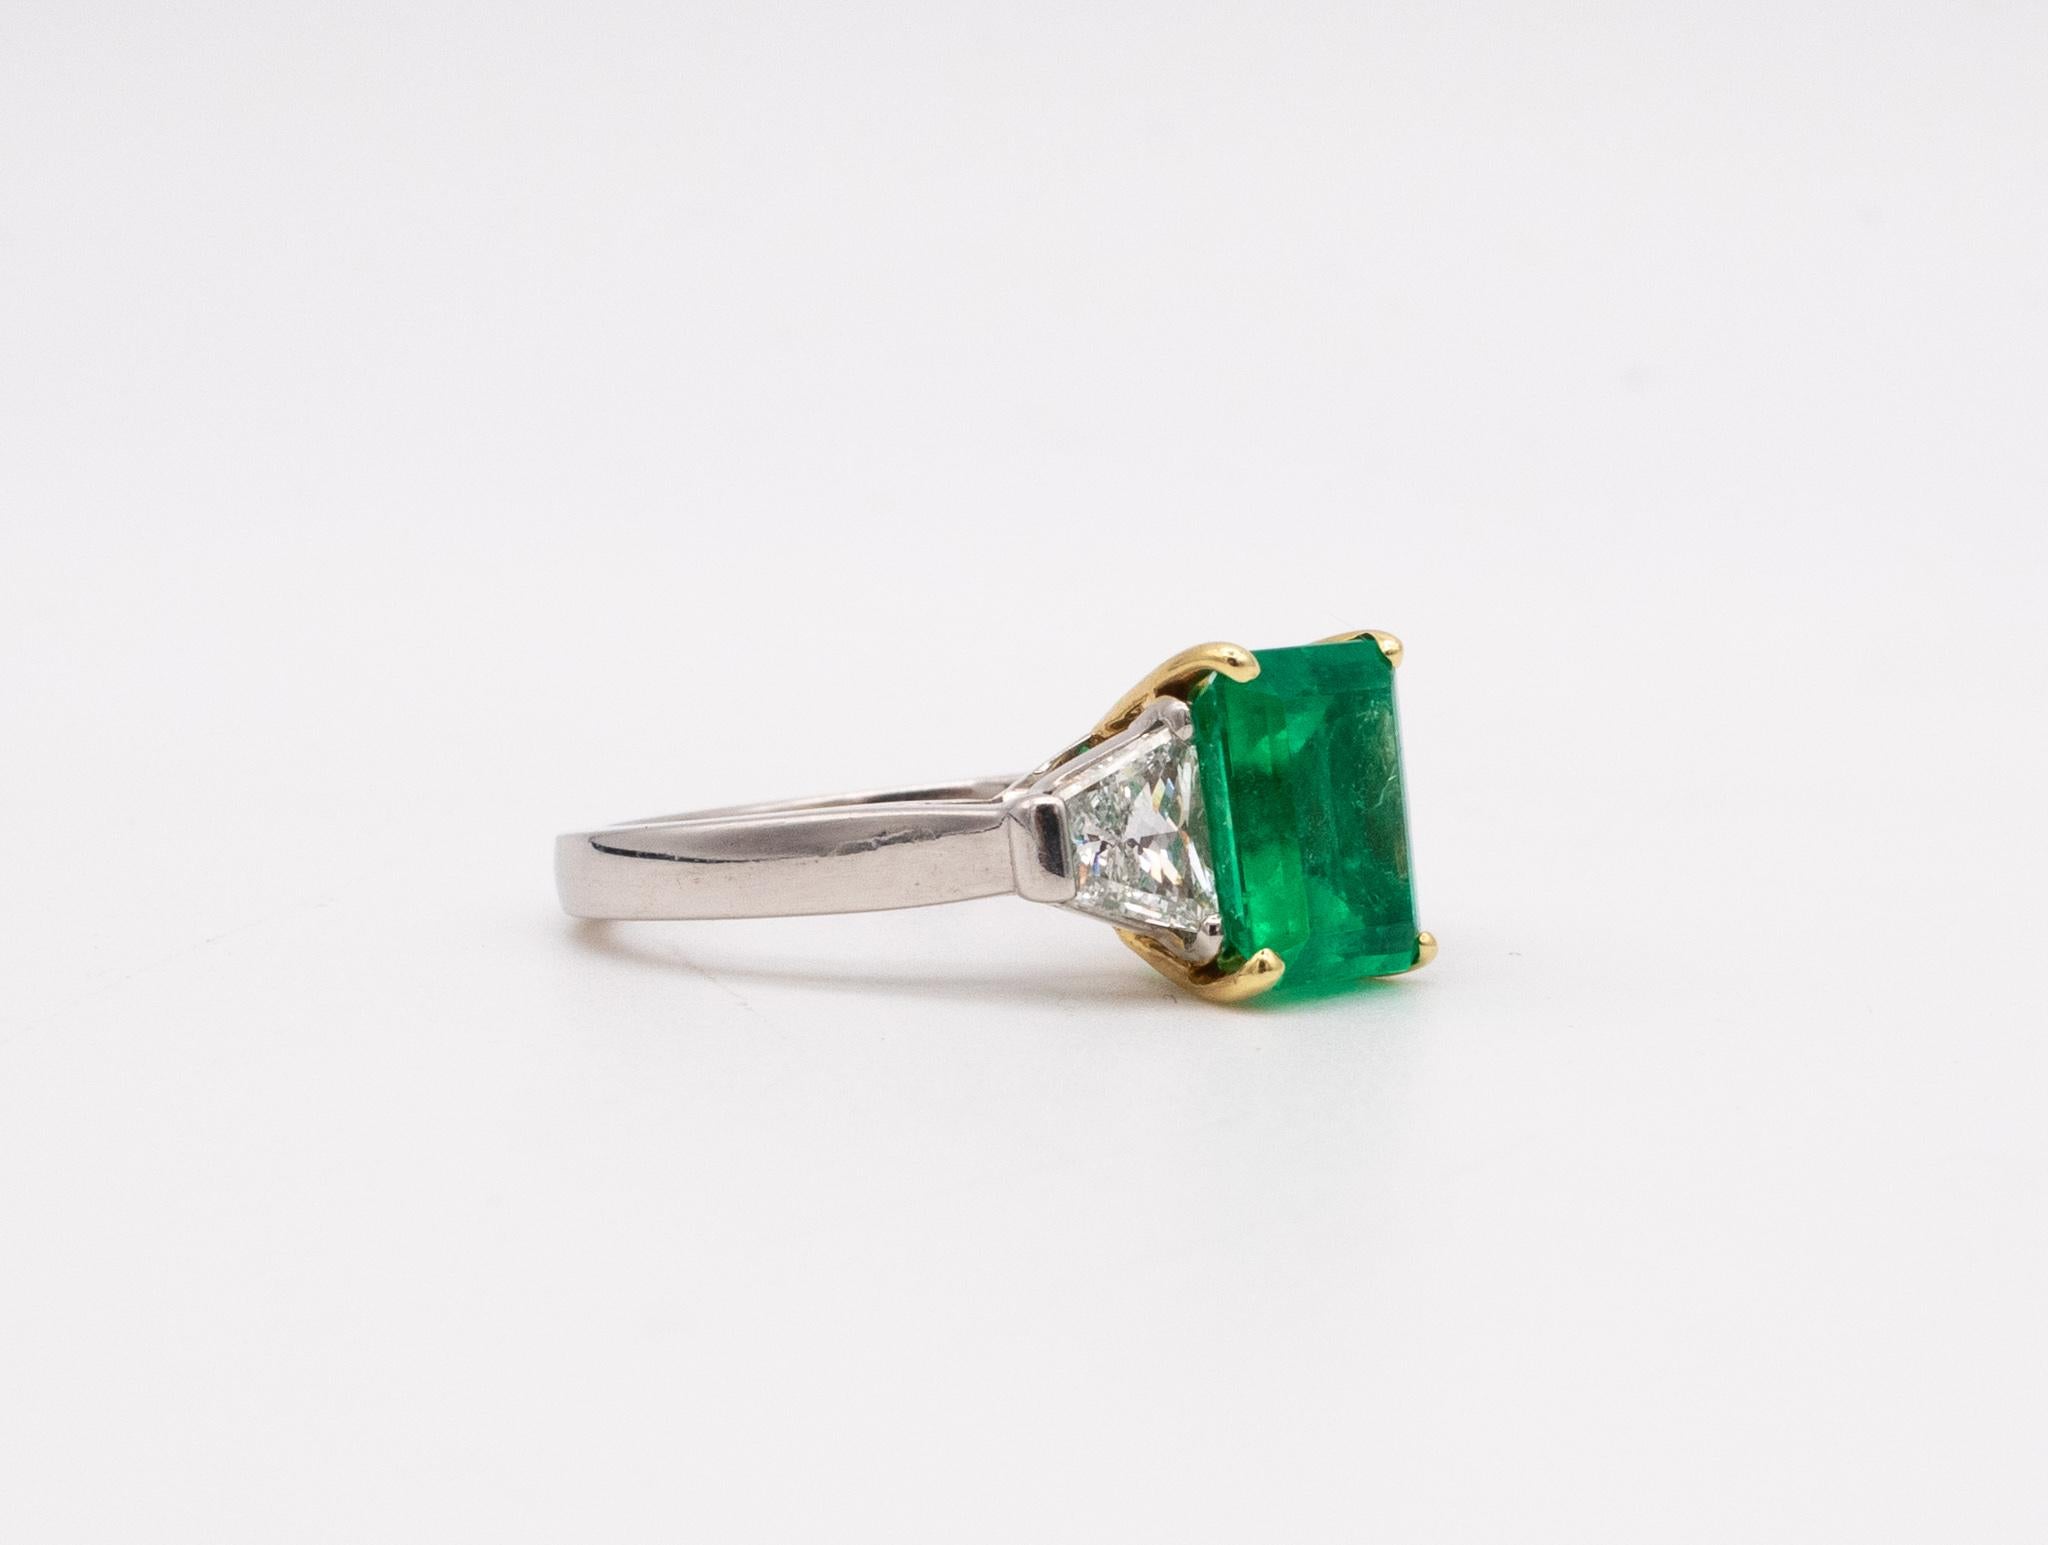 Oscar Heyman Gia Certified Classic Ring Plat 18Kt Gold 3.19 Cts Diamonds Emerald For Sale 2